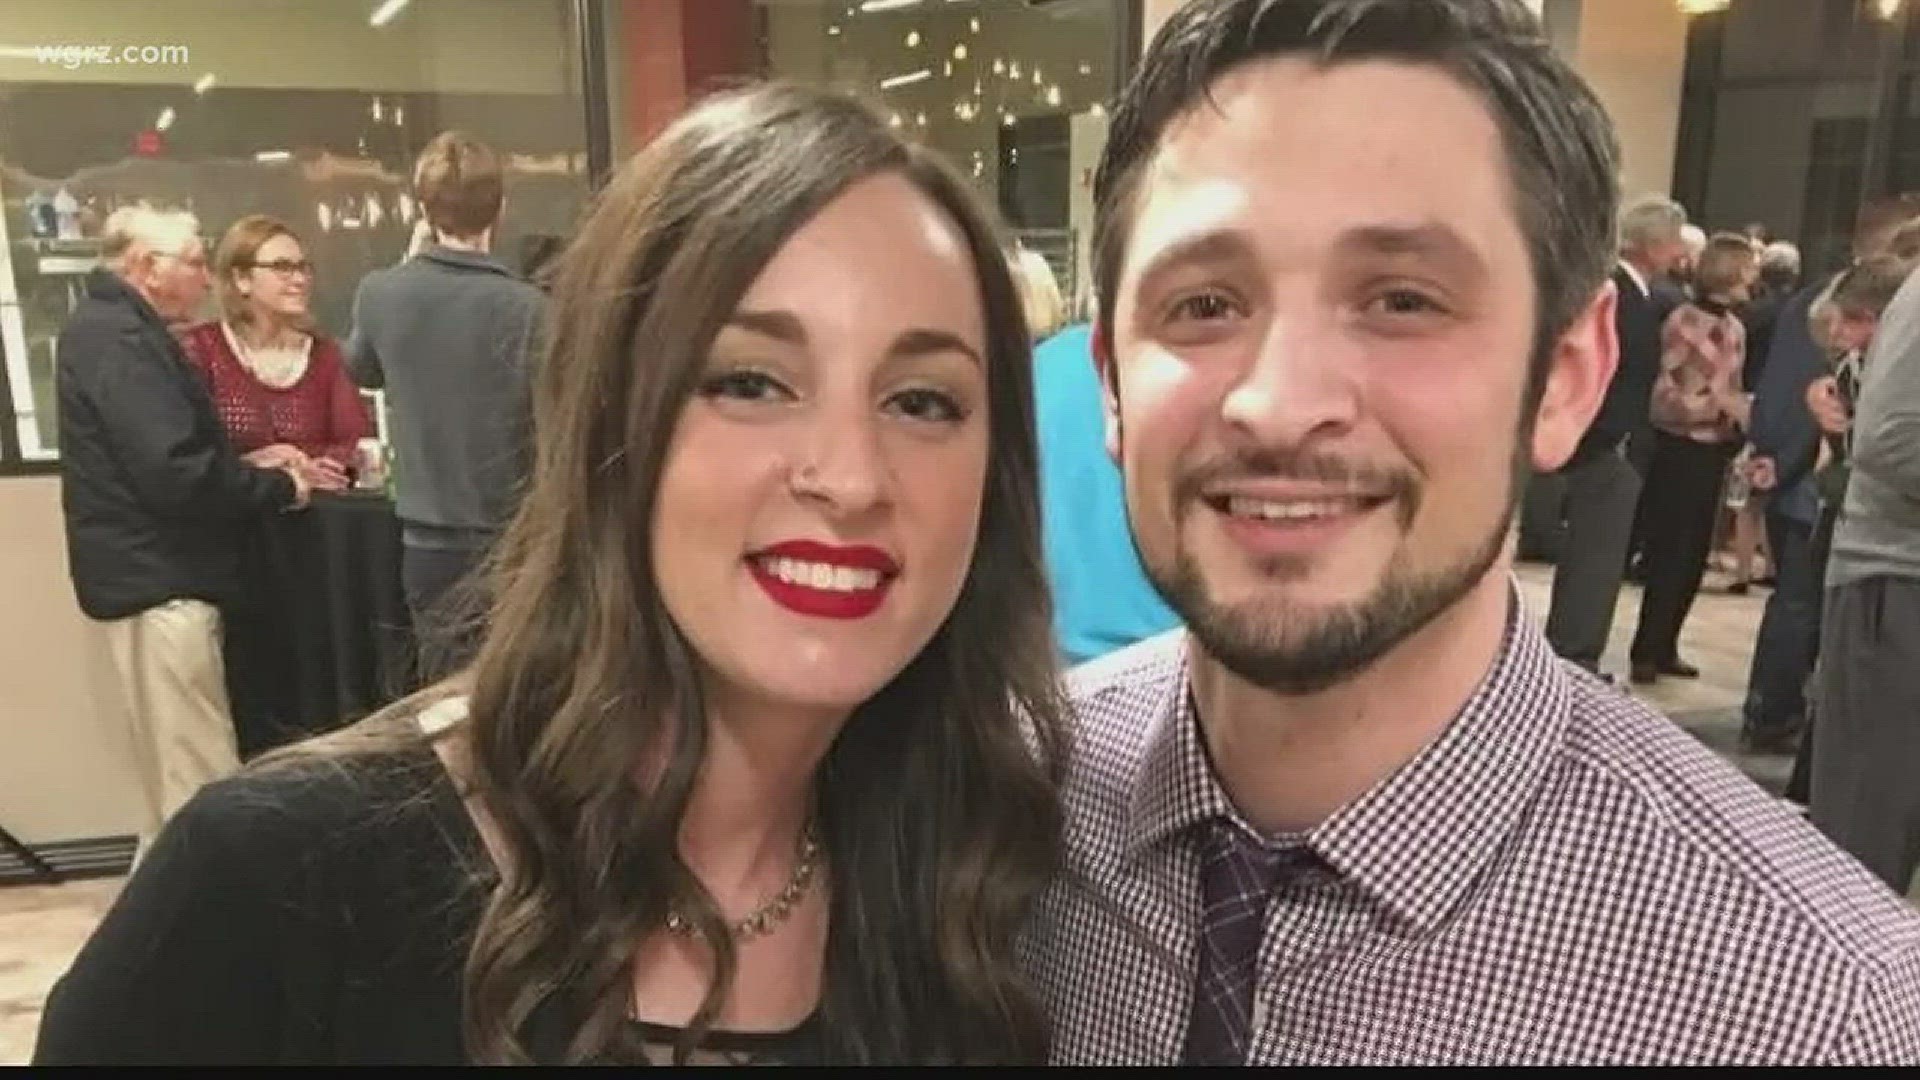 The owners of S & E Jewelers were watching Channel 2 on Christmas when they were moved to respond to a story of a woman who beat addiction and thanked Erie County Sheriff's deputies for playing a role in her road to success.